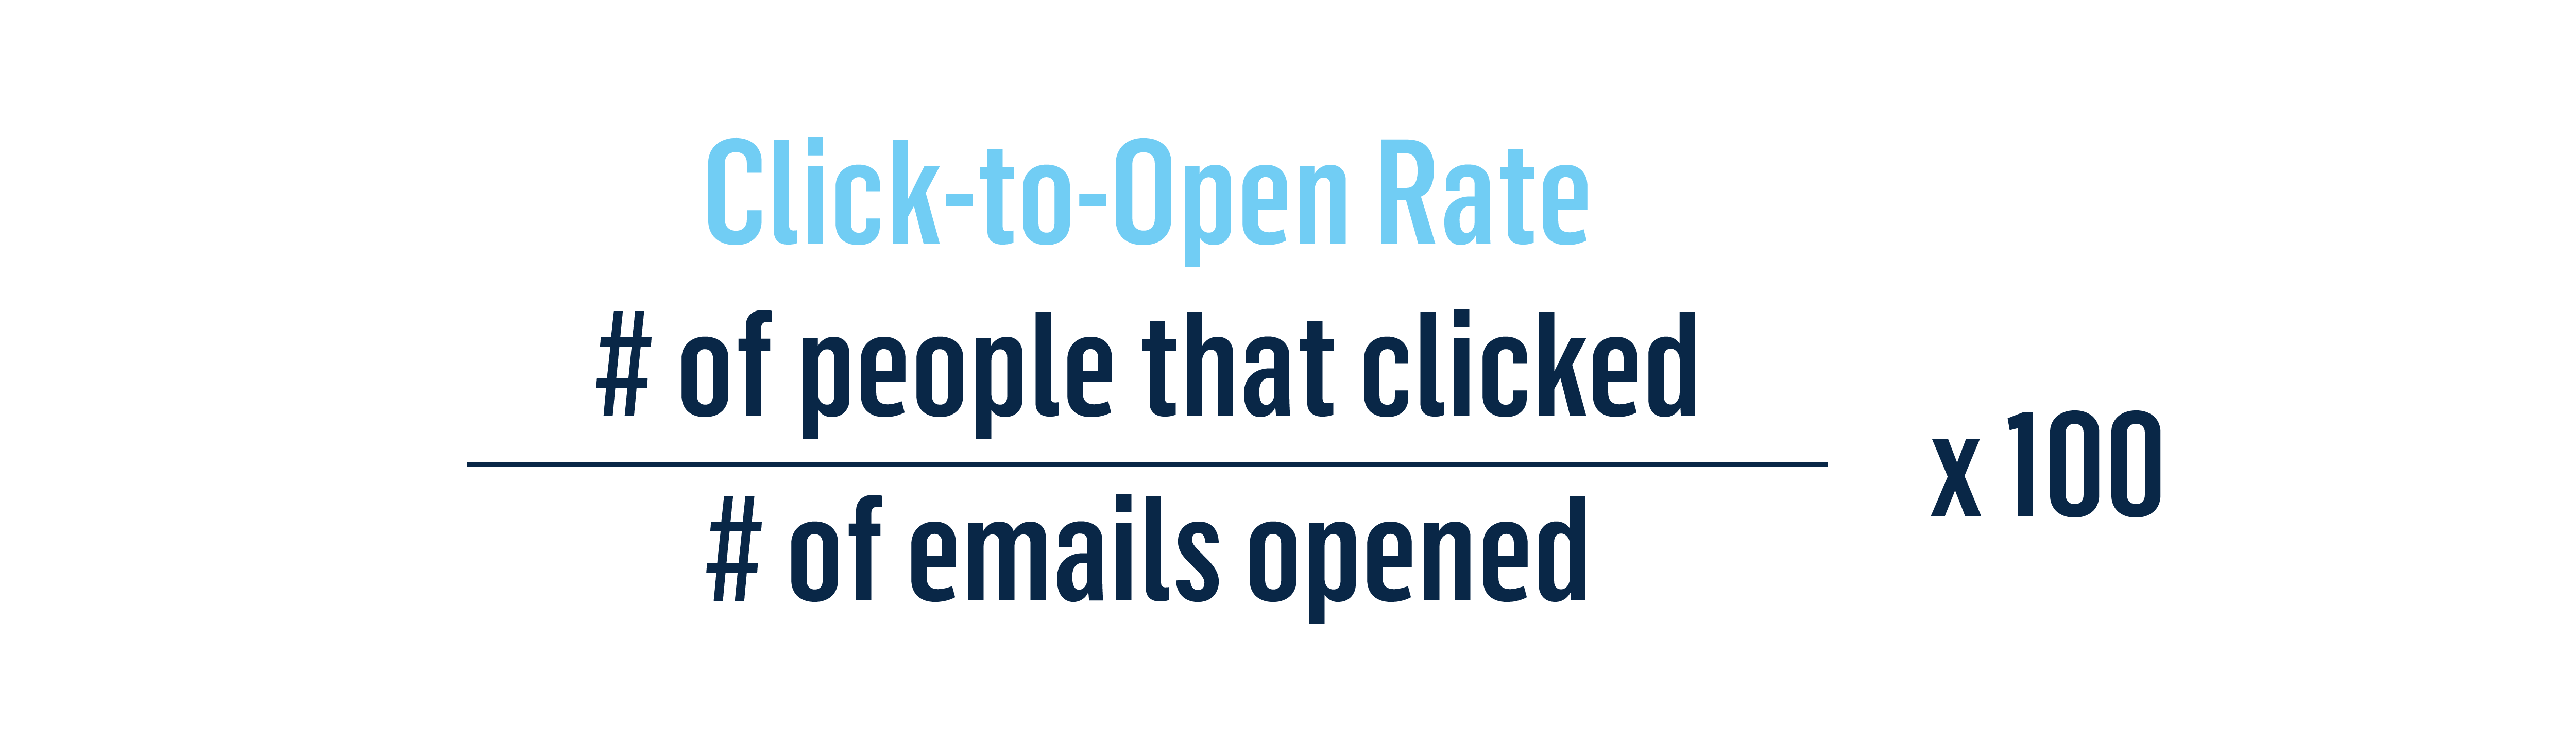 Click-to-Open Rate: # of people that clicked / # of emails opened x 100